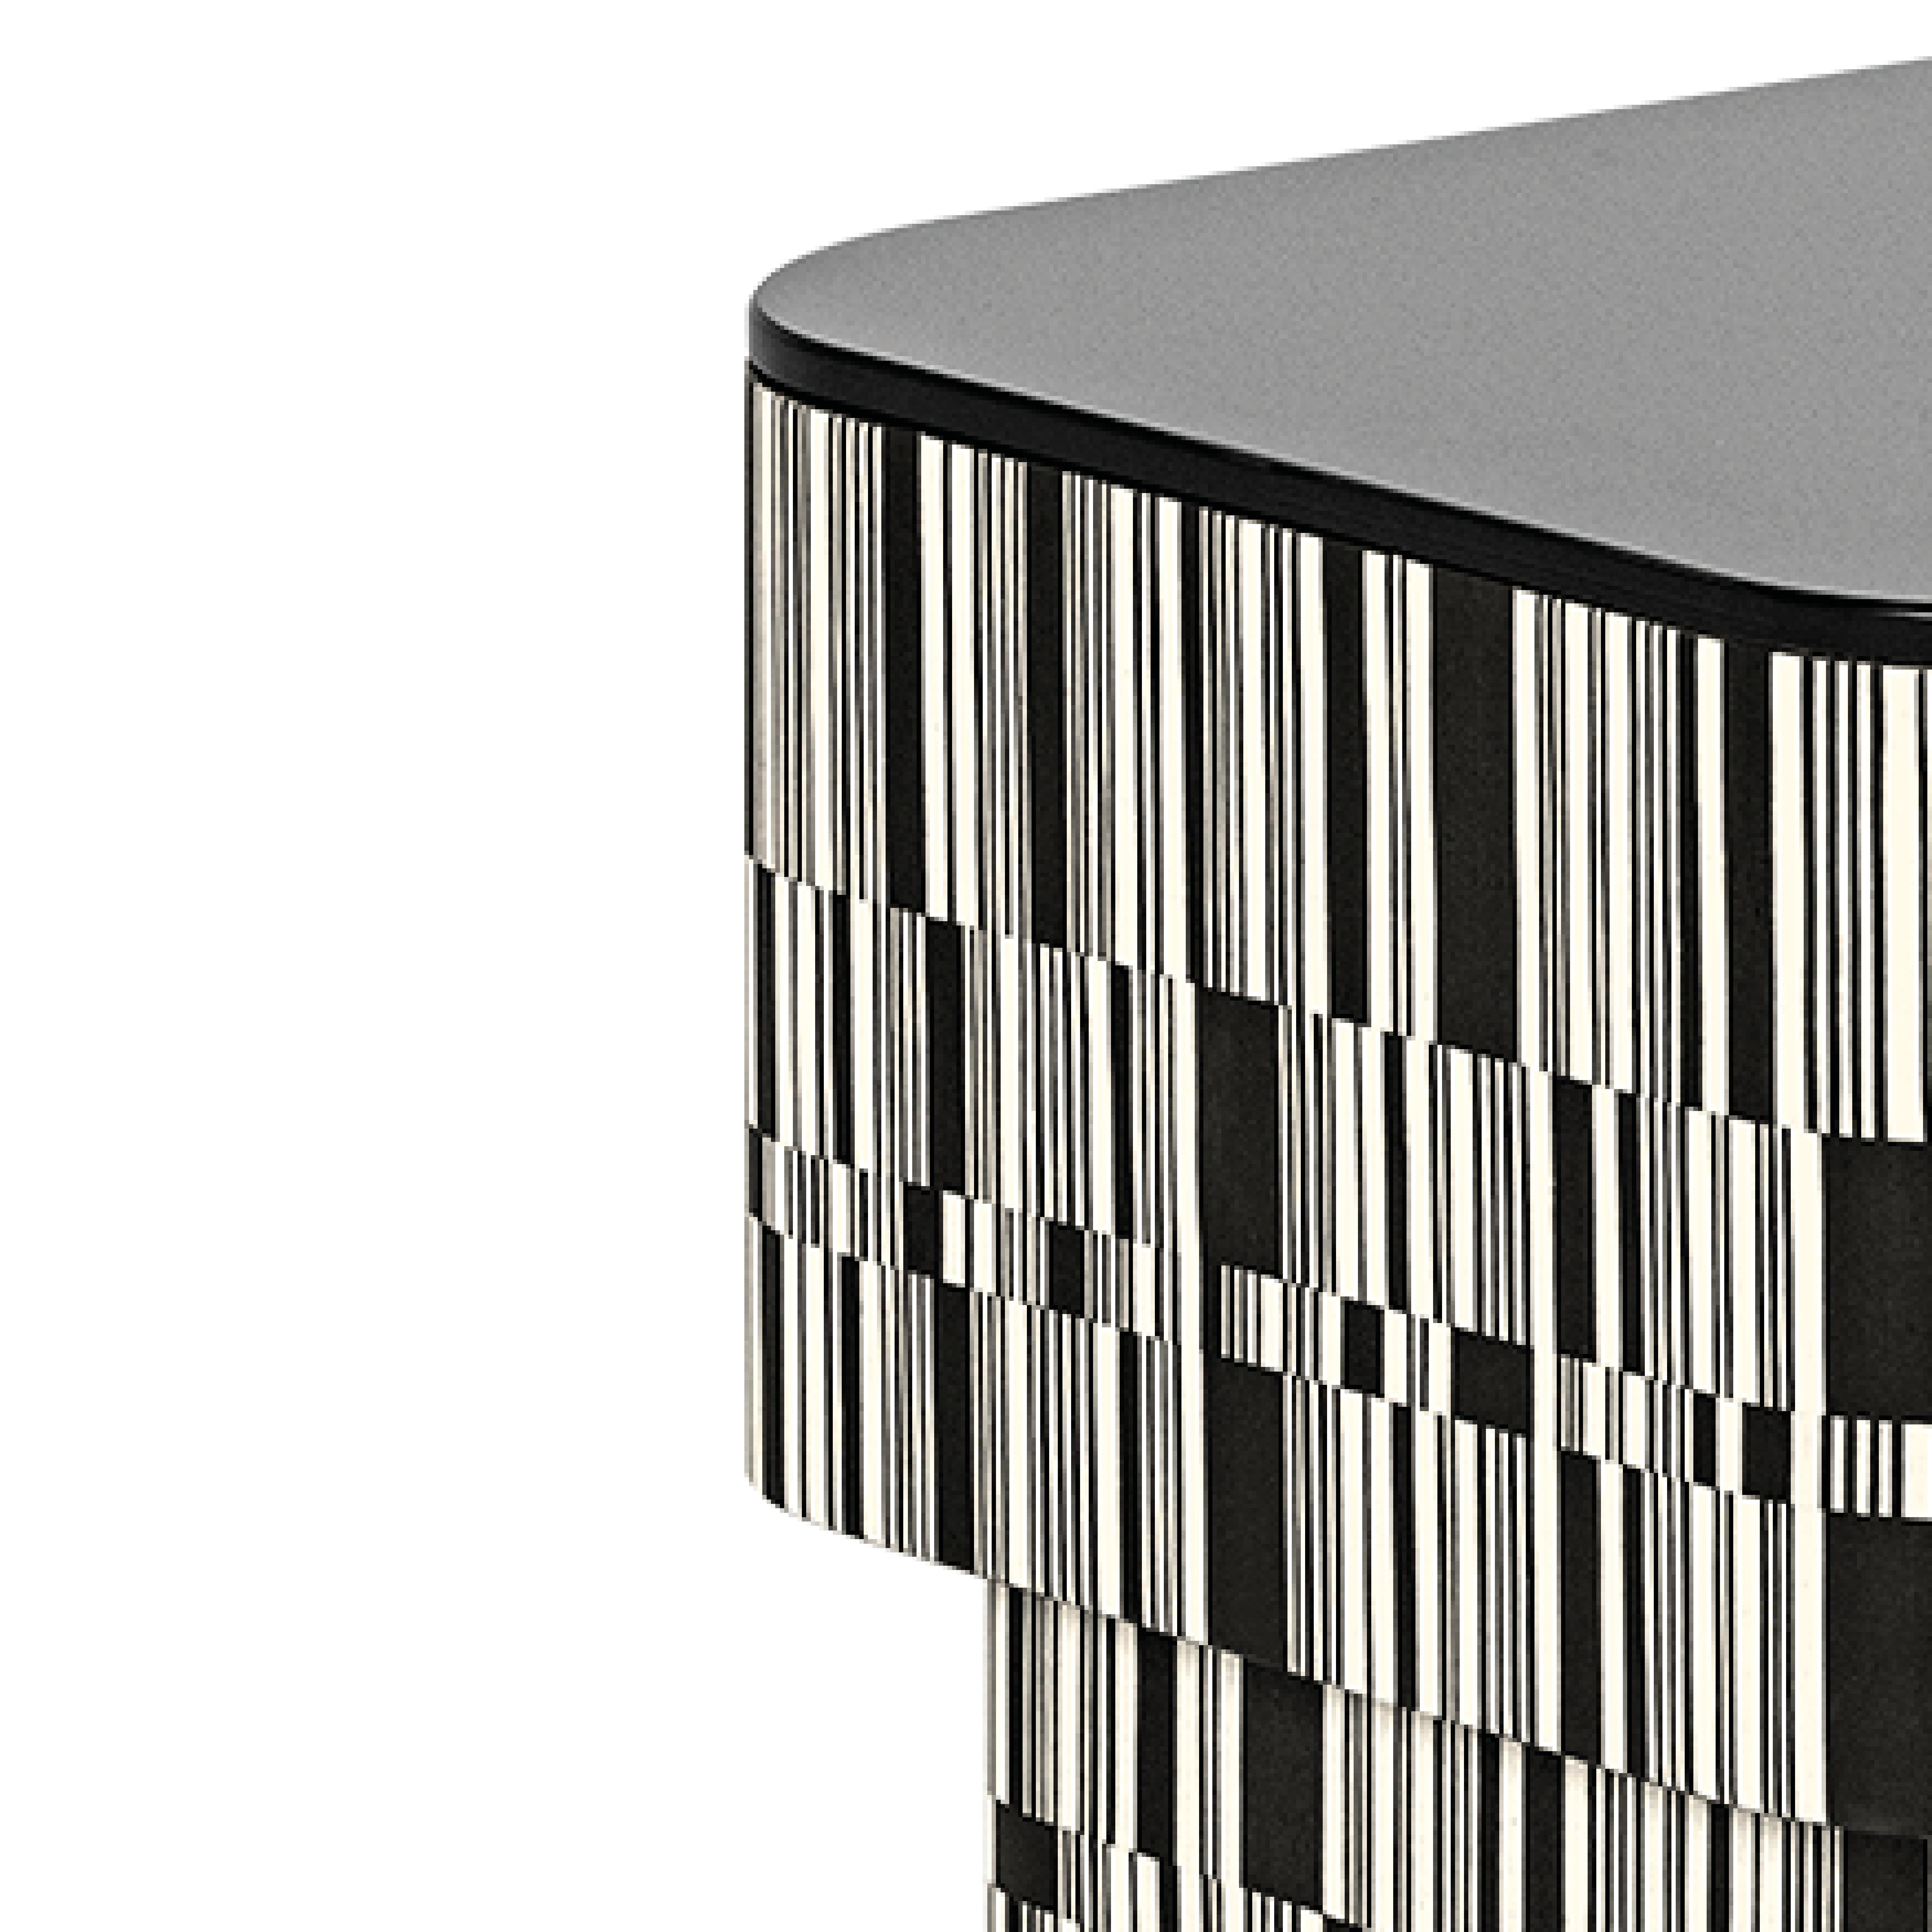 The structure of Enigma side table is upholstered with wood, processed with cross-grain inlay with white and black shades that alternate in an irregular way. It presents matt Matrix finish and the black glass top.